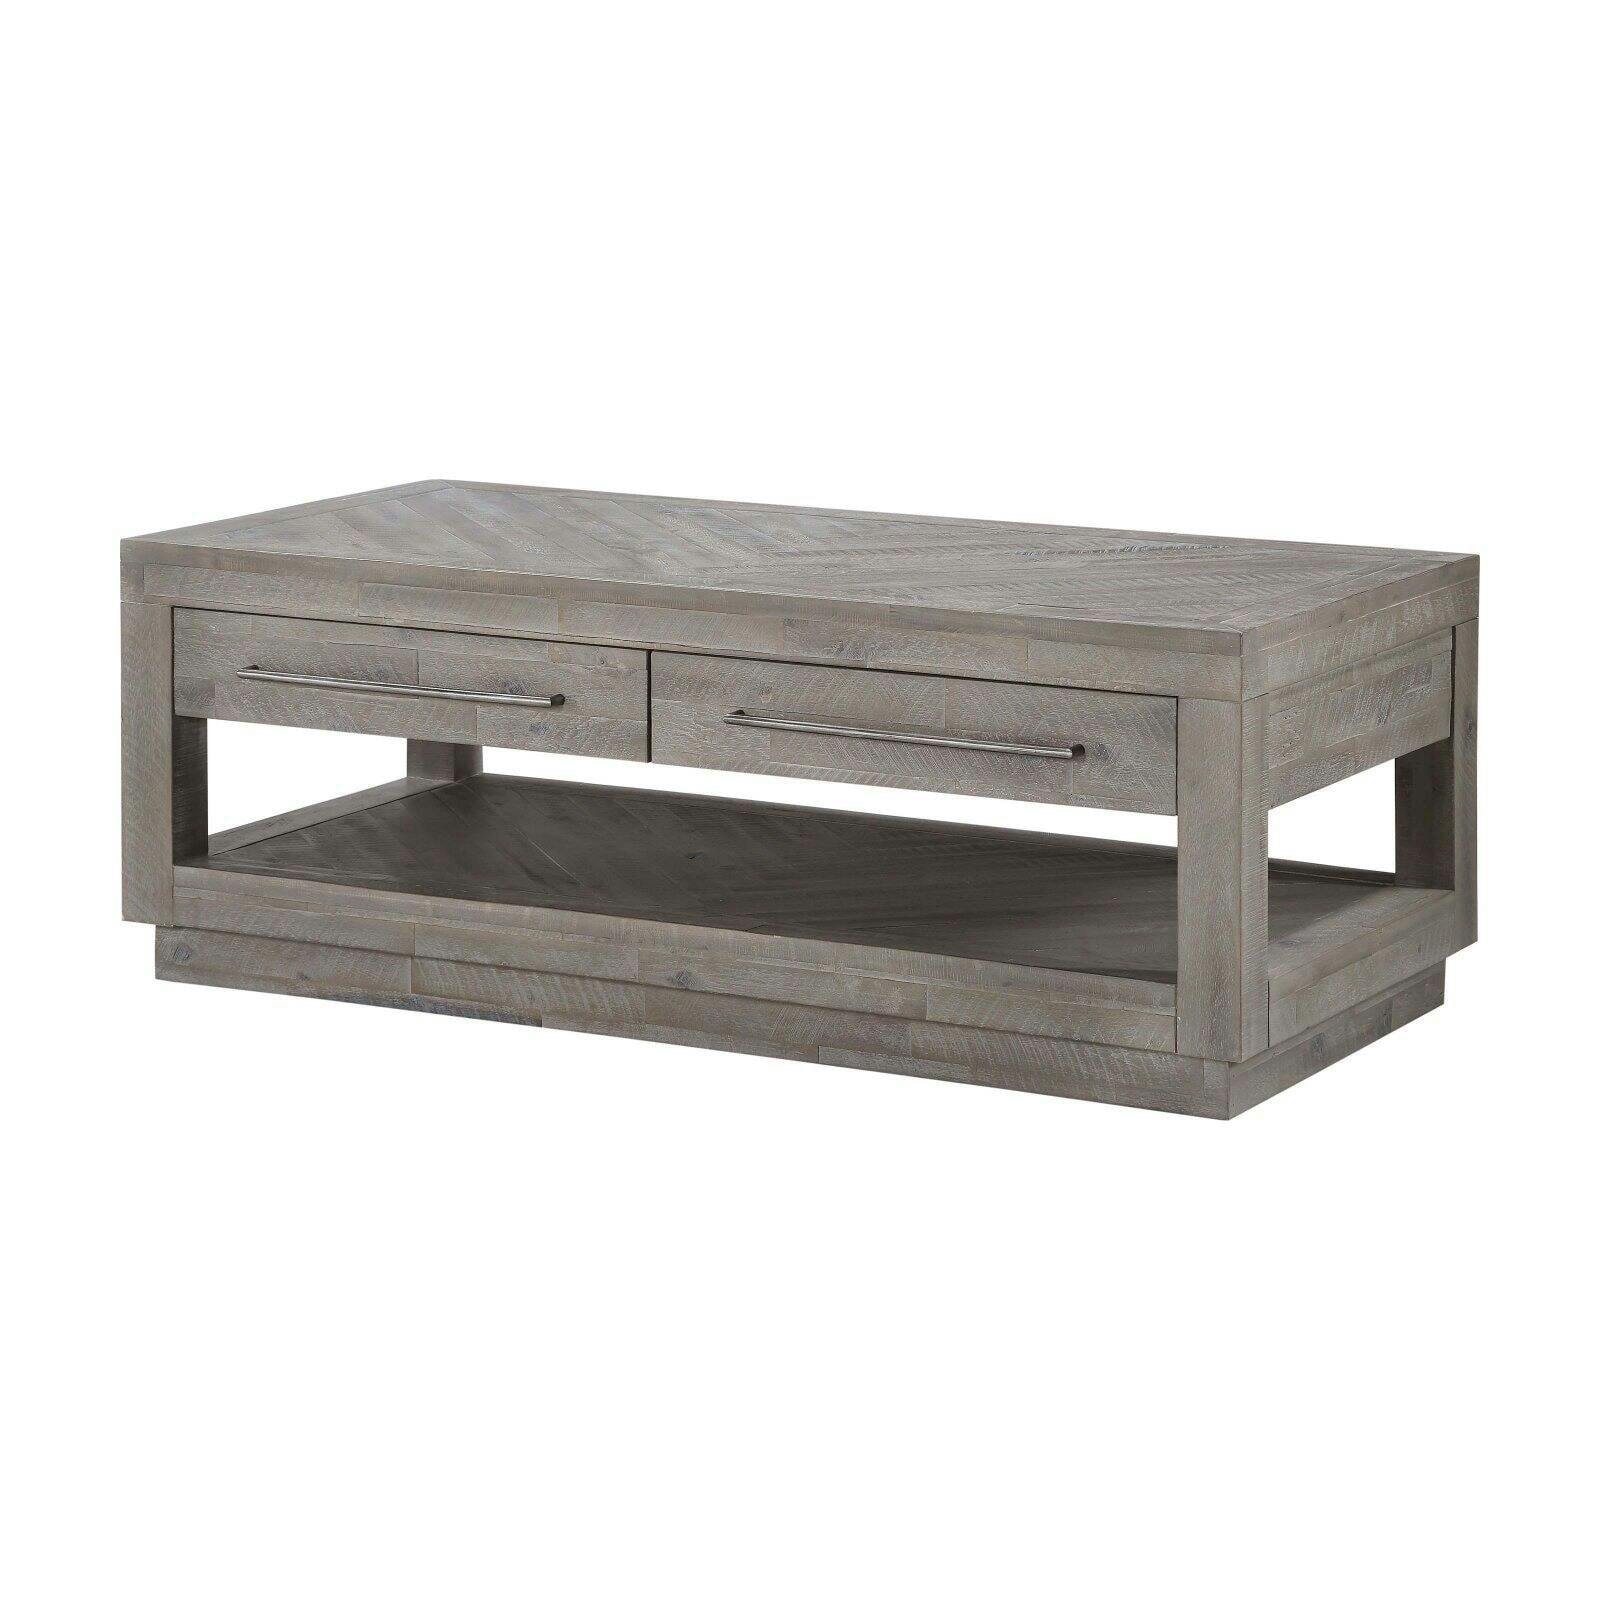 Rustic Latte Solid Wood Rectangular Coffee Table with Storage